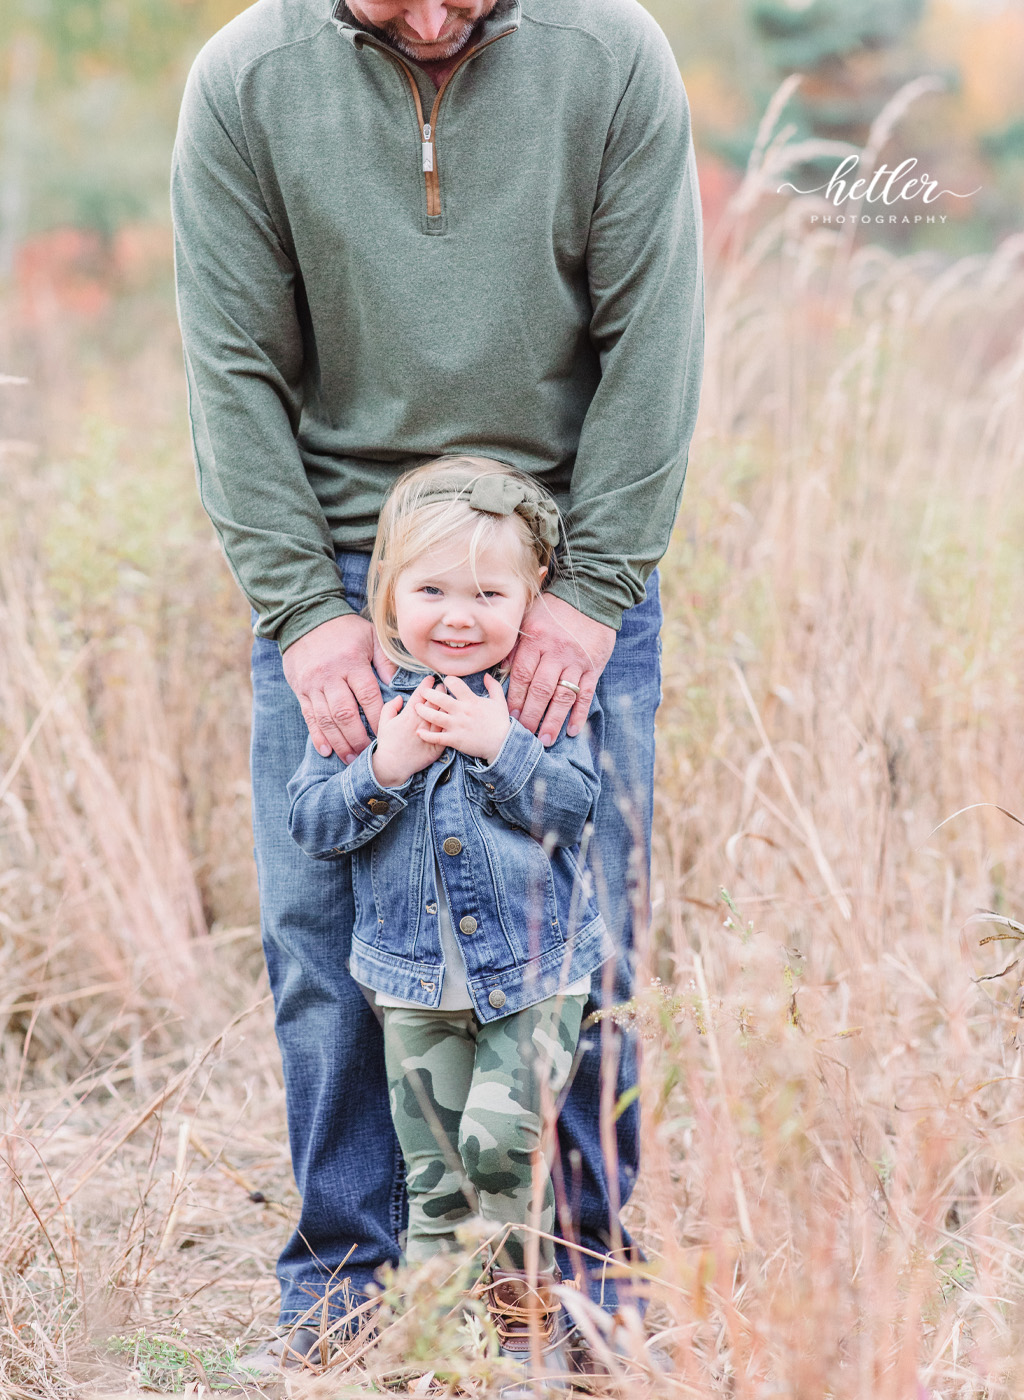 Fall family photos at Wahlfield Park in Grand Rapids Michigan